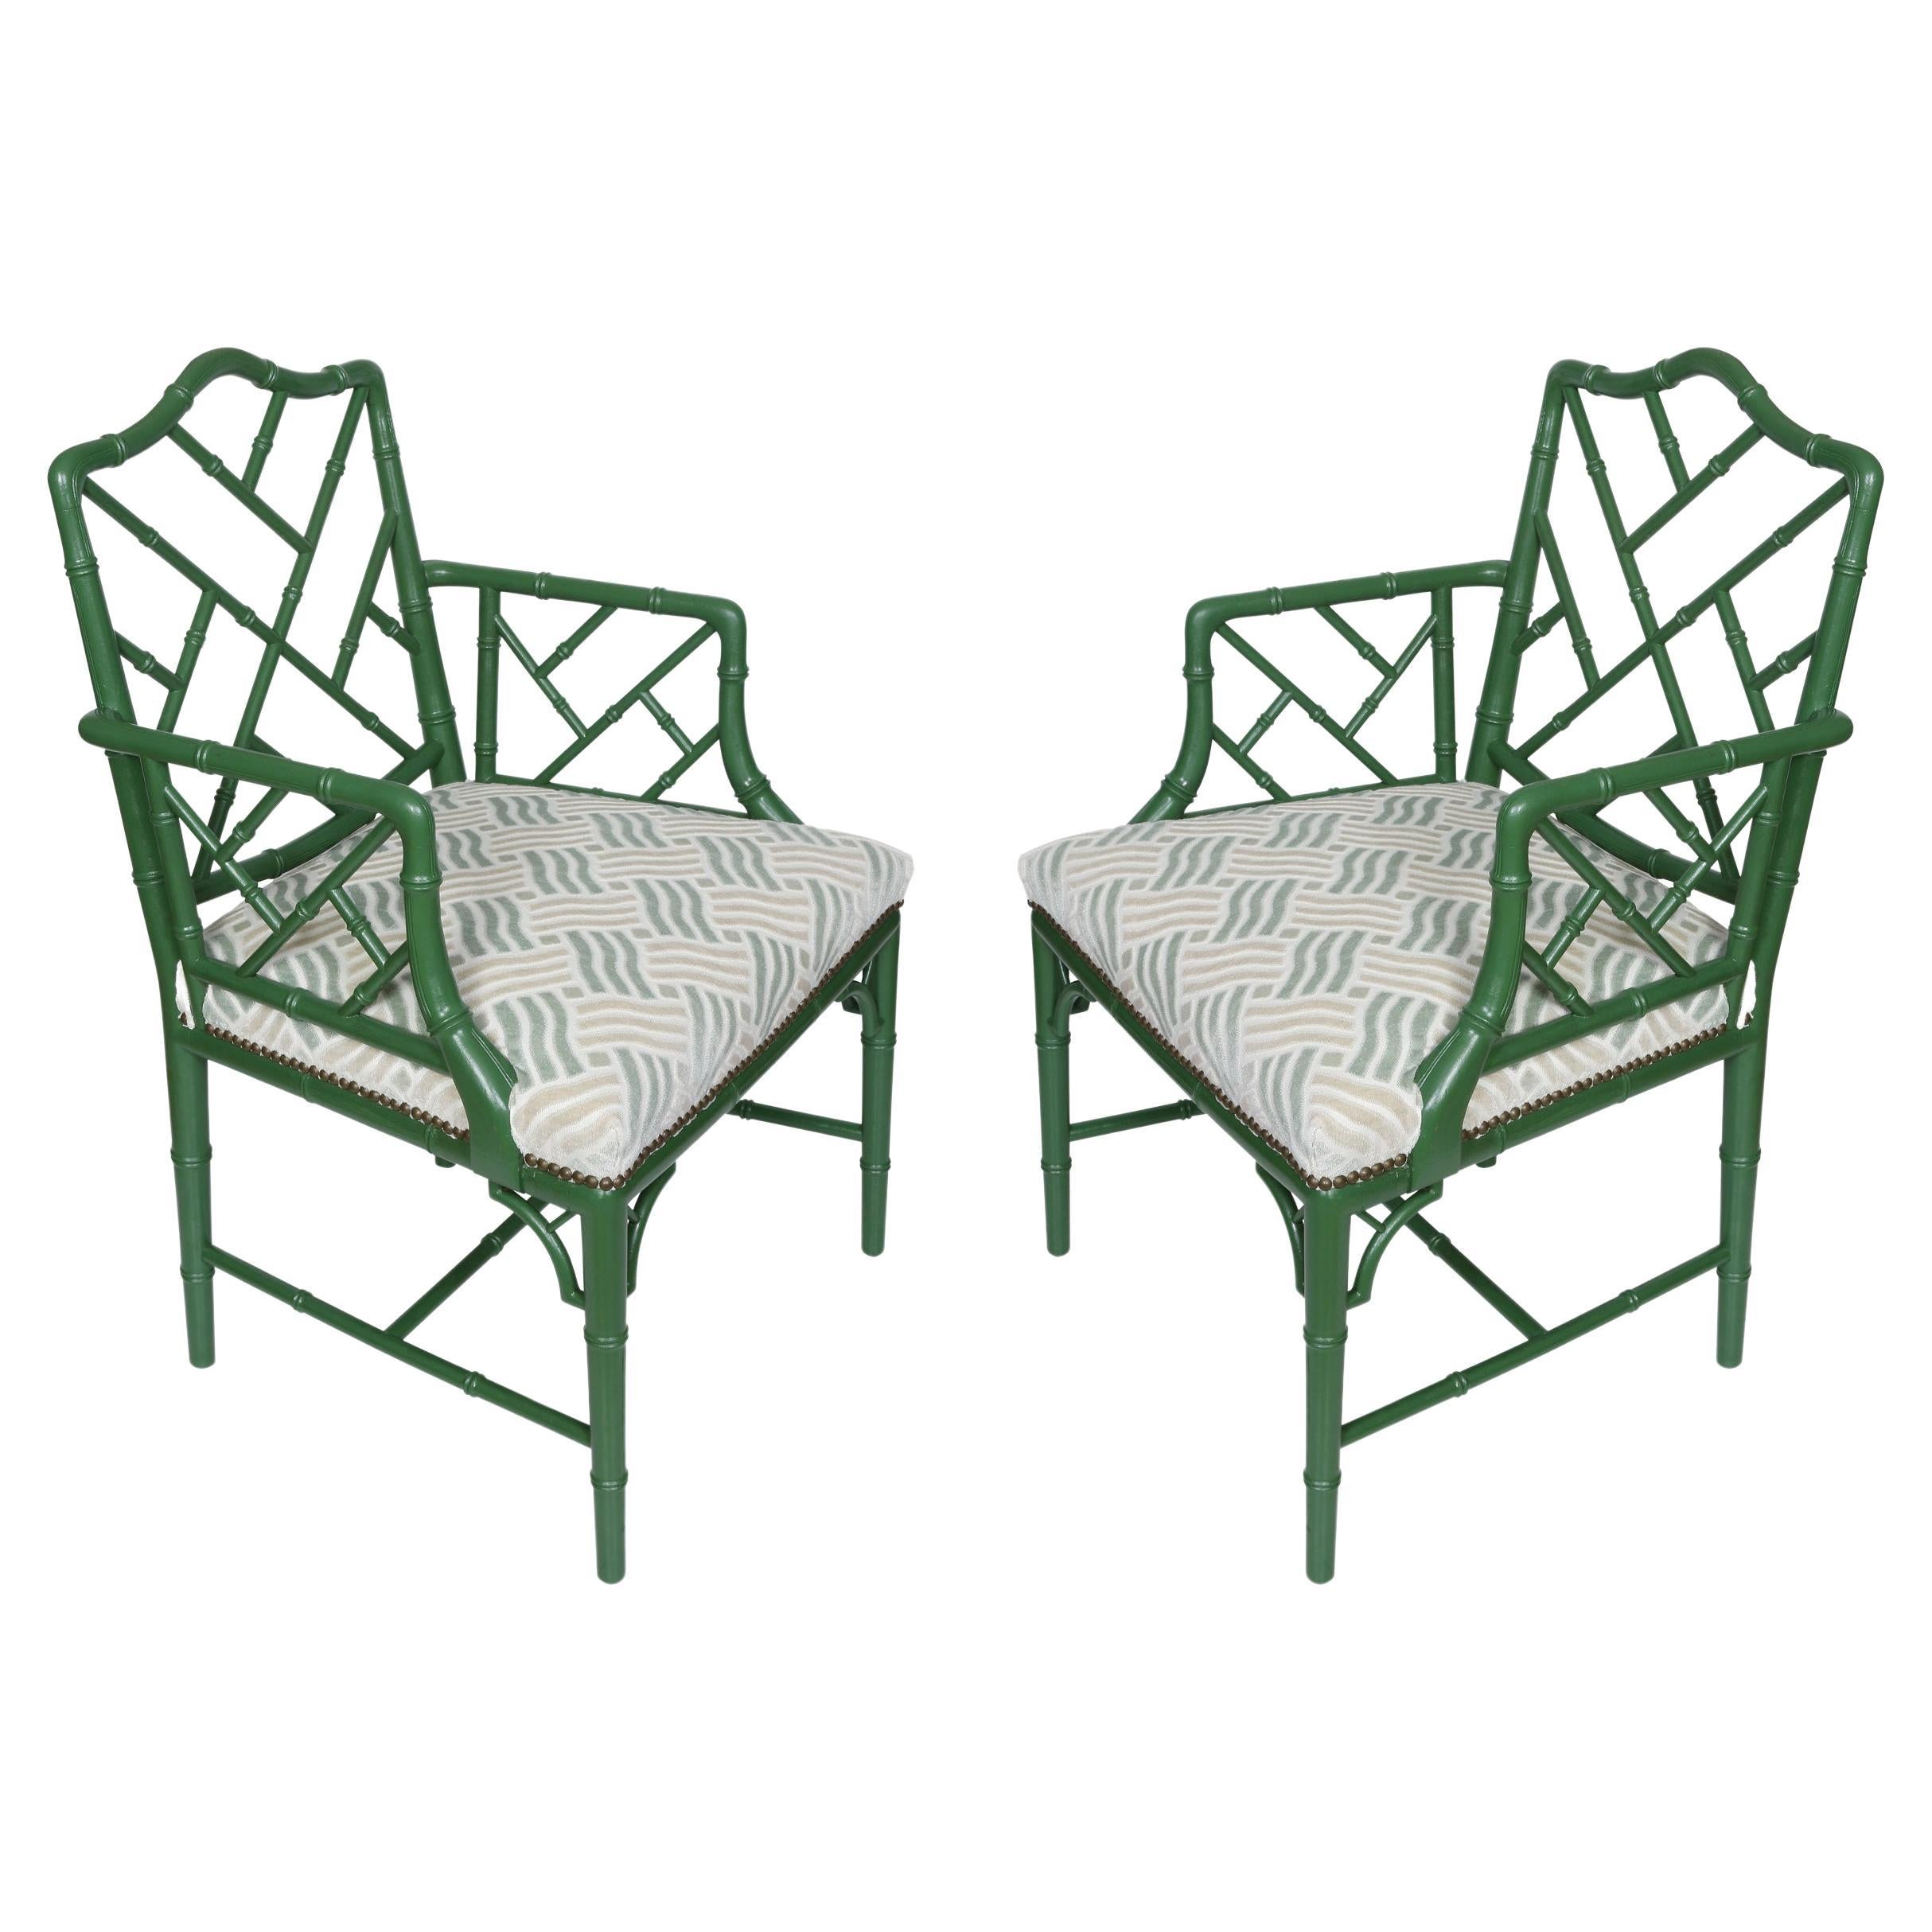 Pair of Green Bamboo Style Arm Chairs With Cut Velvet Seat Cushions